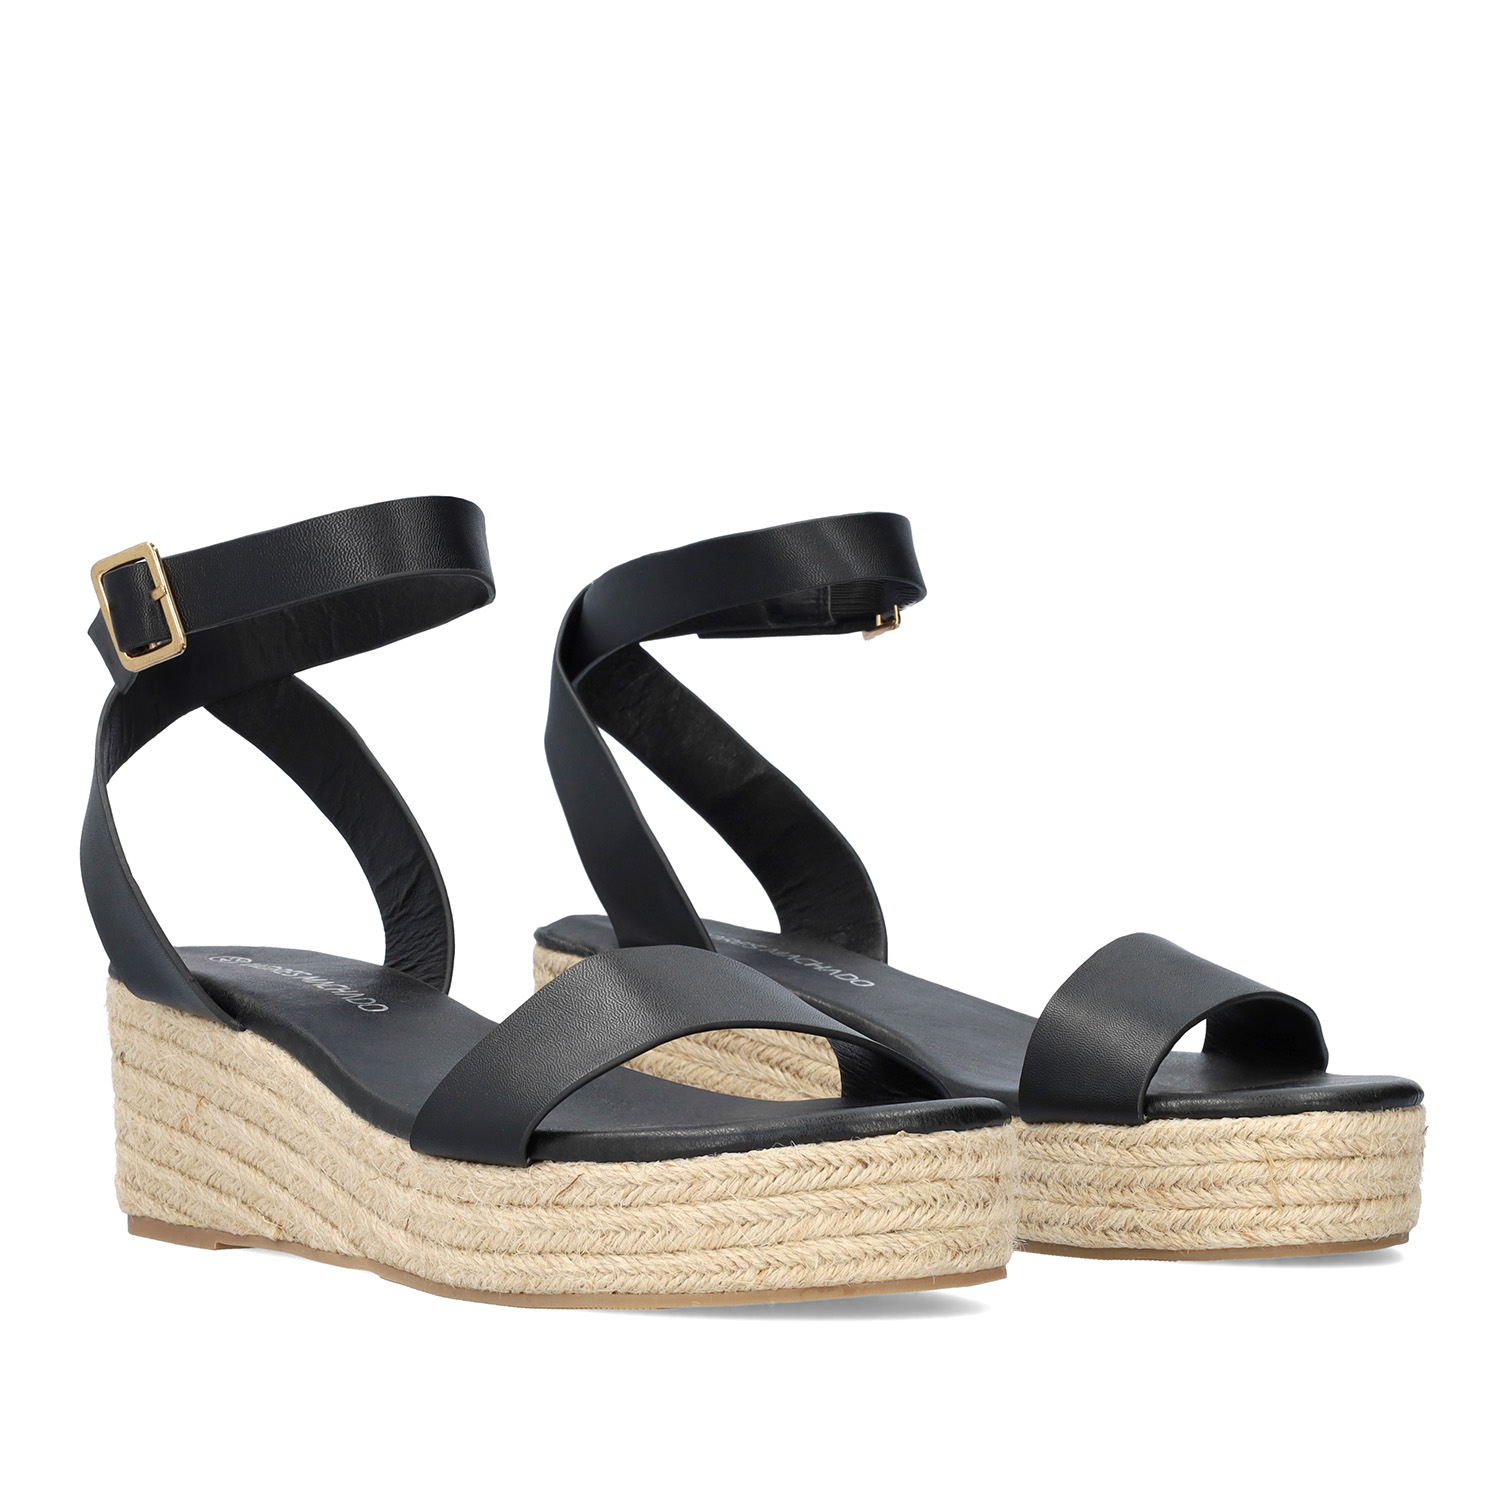 Black soft sandals with a jute wedge 